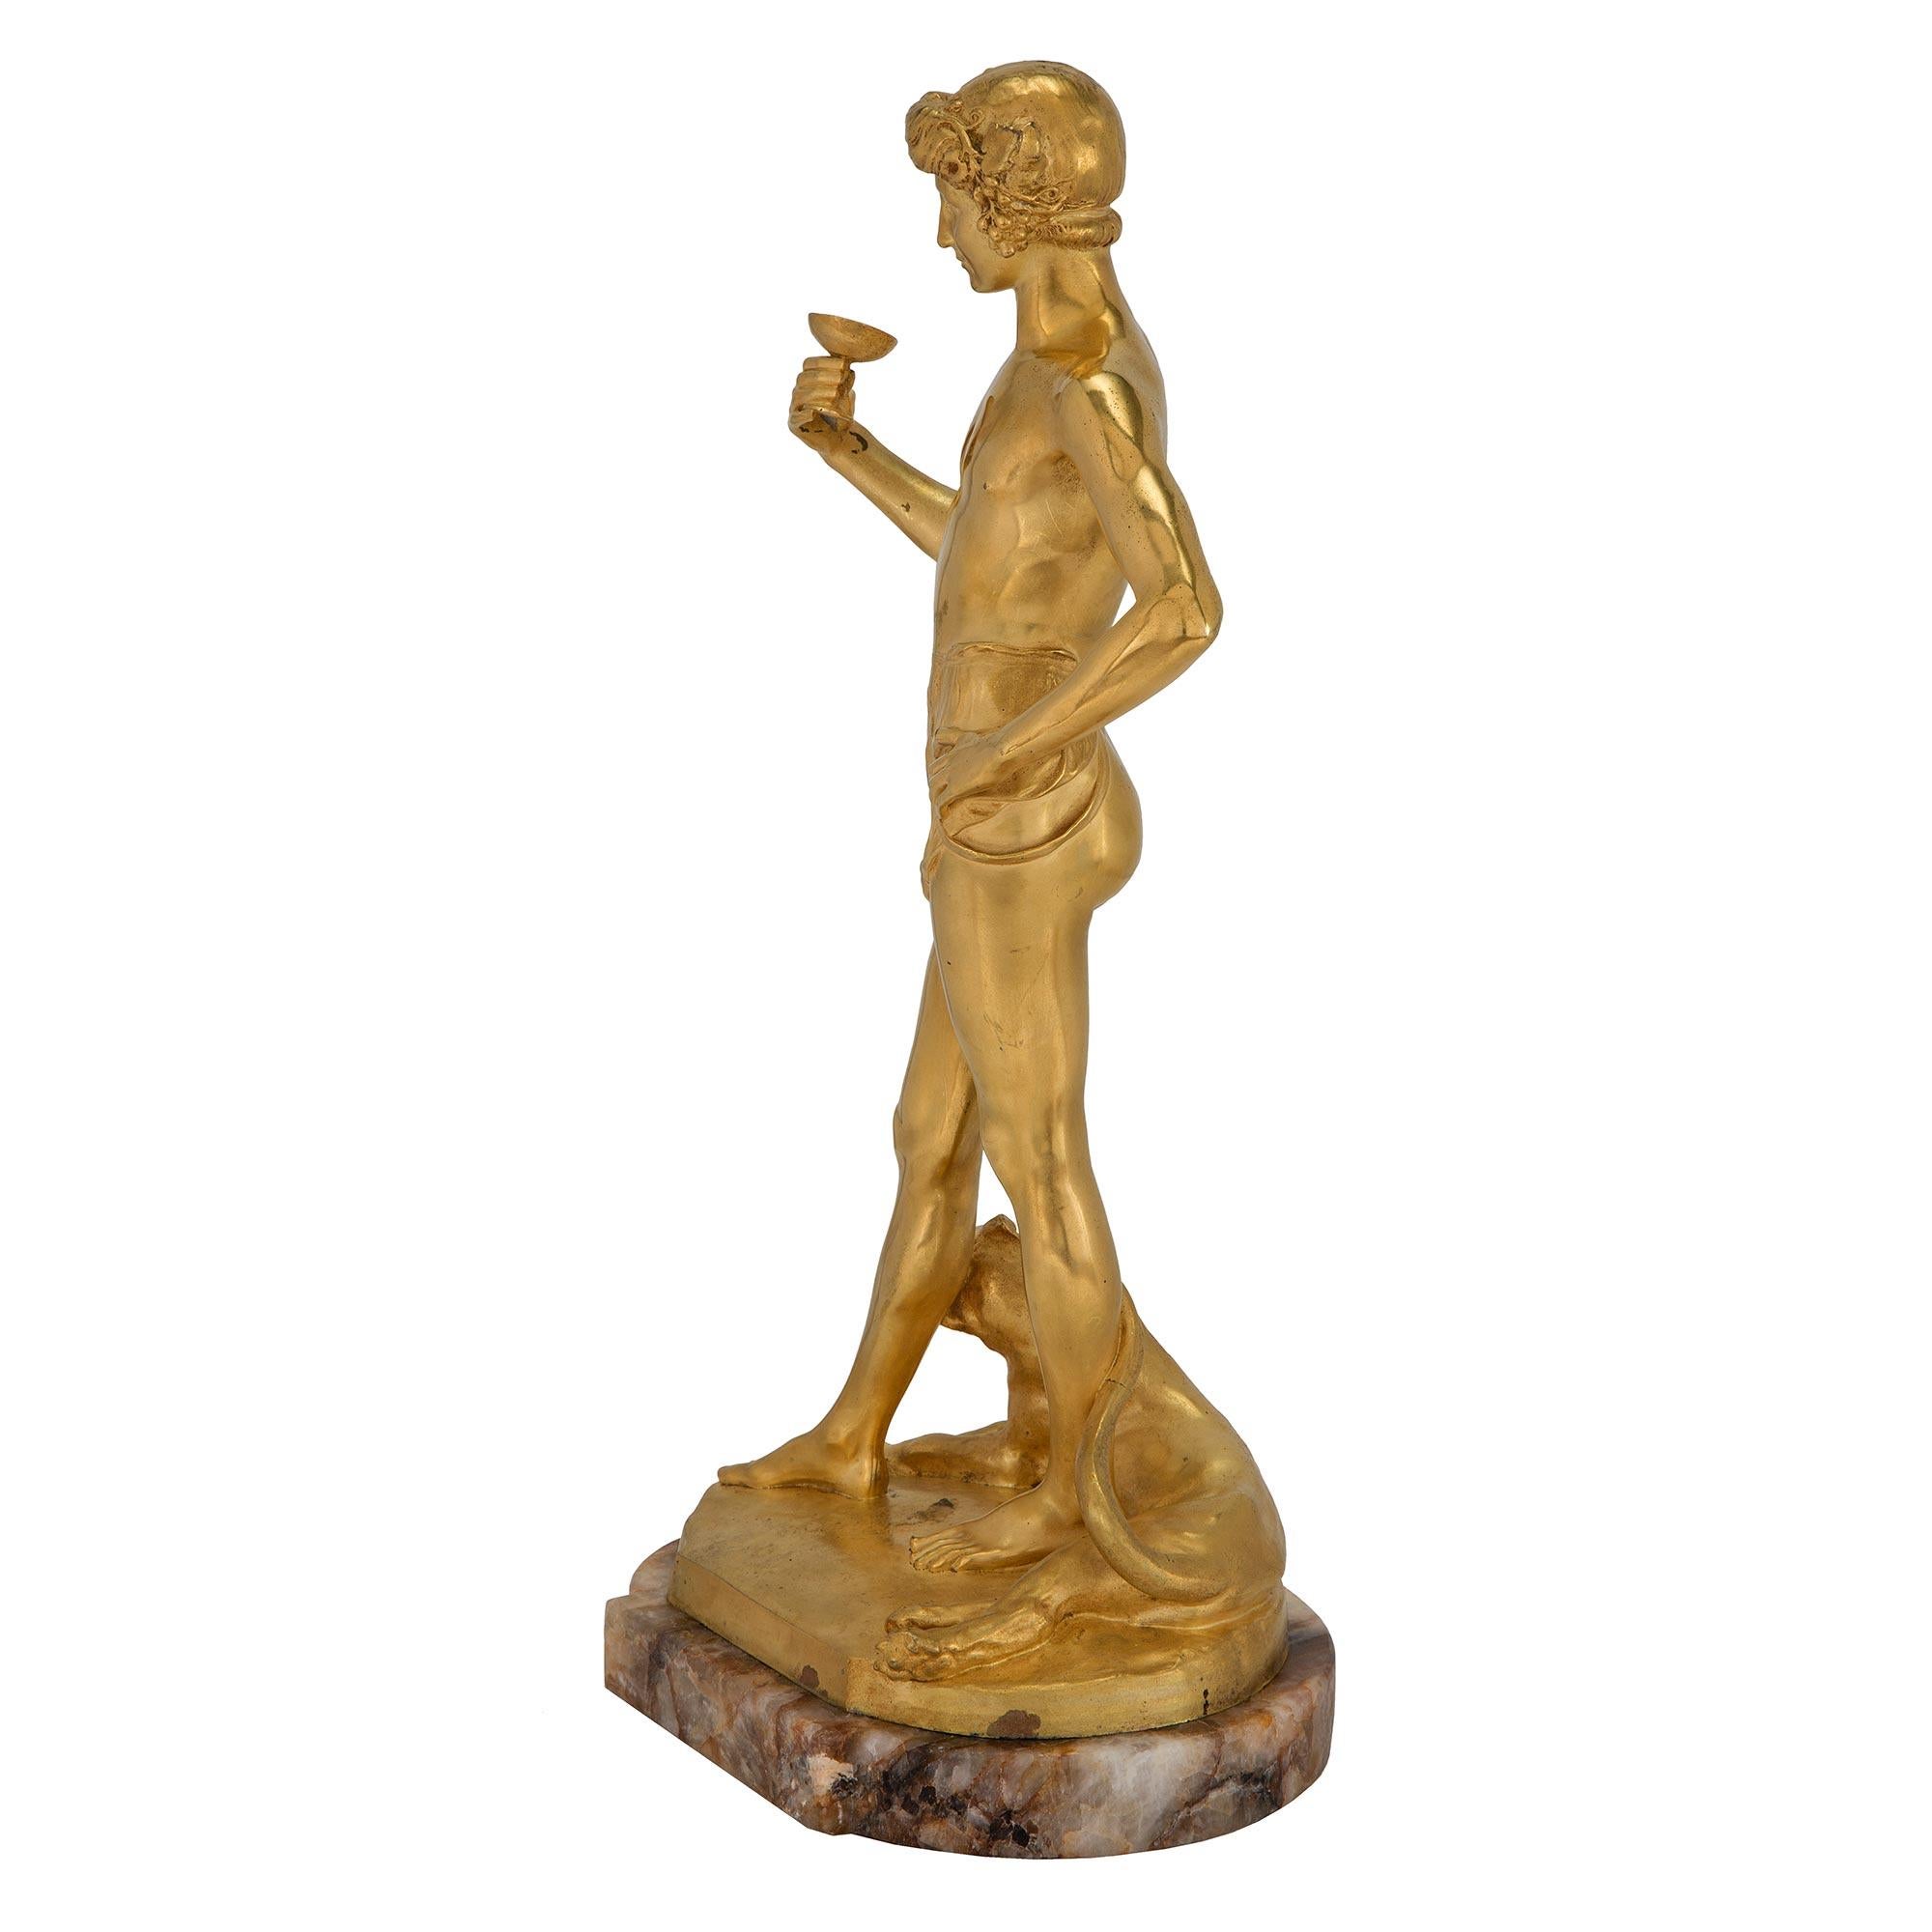 A handsome and high quality French Turn of the Century Neo-Classical st. Ormolu and Quartz statue of Aquarius, signed Antonin Carlès. This handsome statue is raised on an oval Quartz base which follows the contours of the Ormolu statue above. This